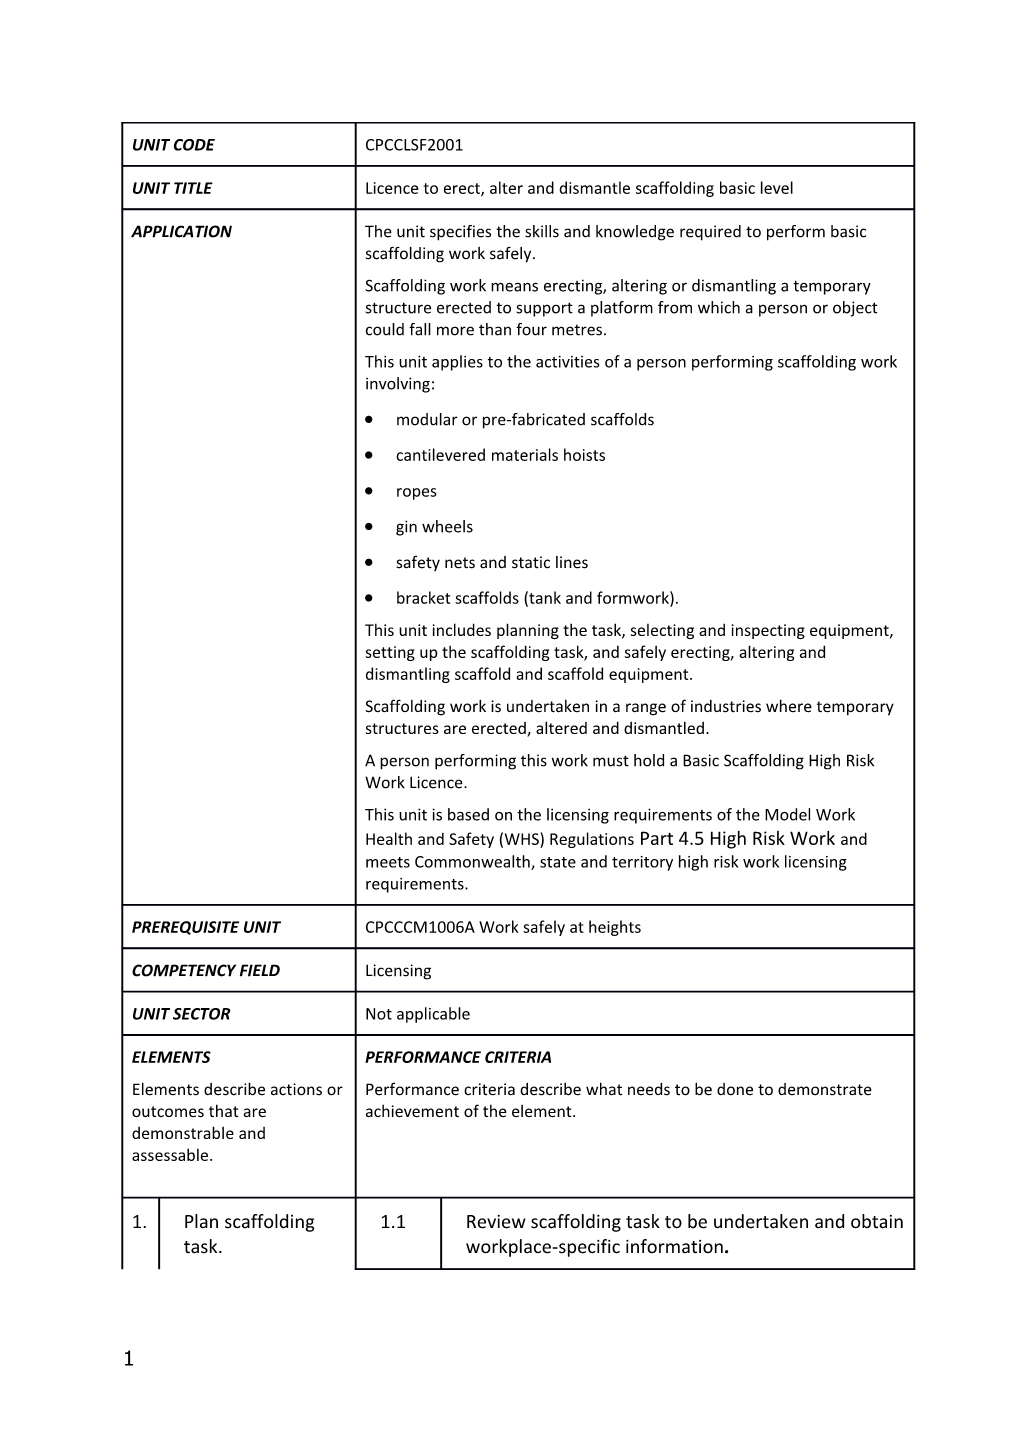 Assessment Requirements s3